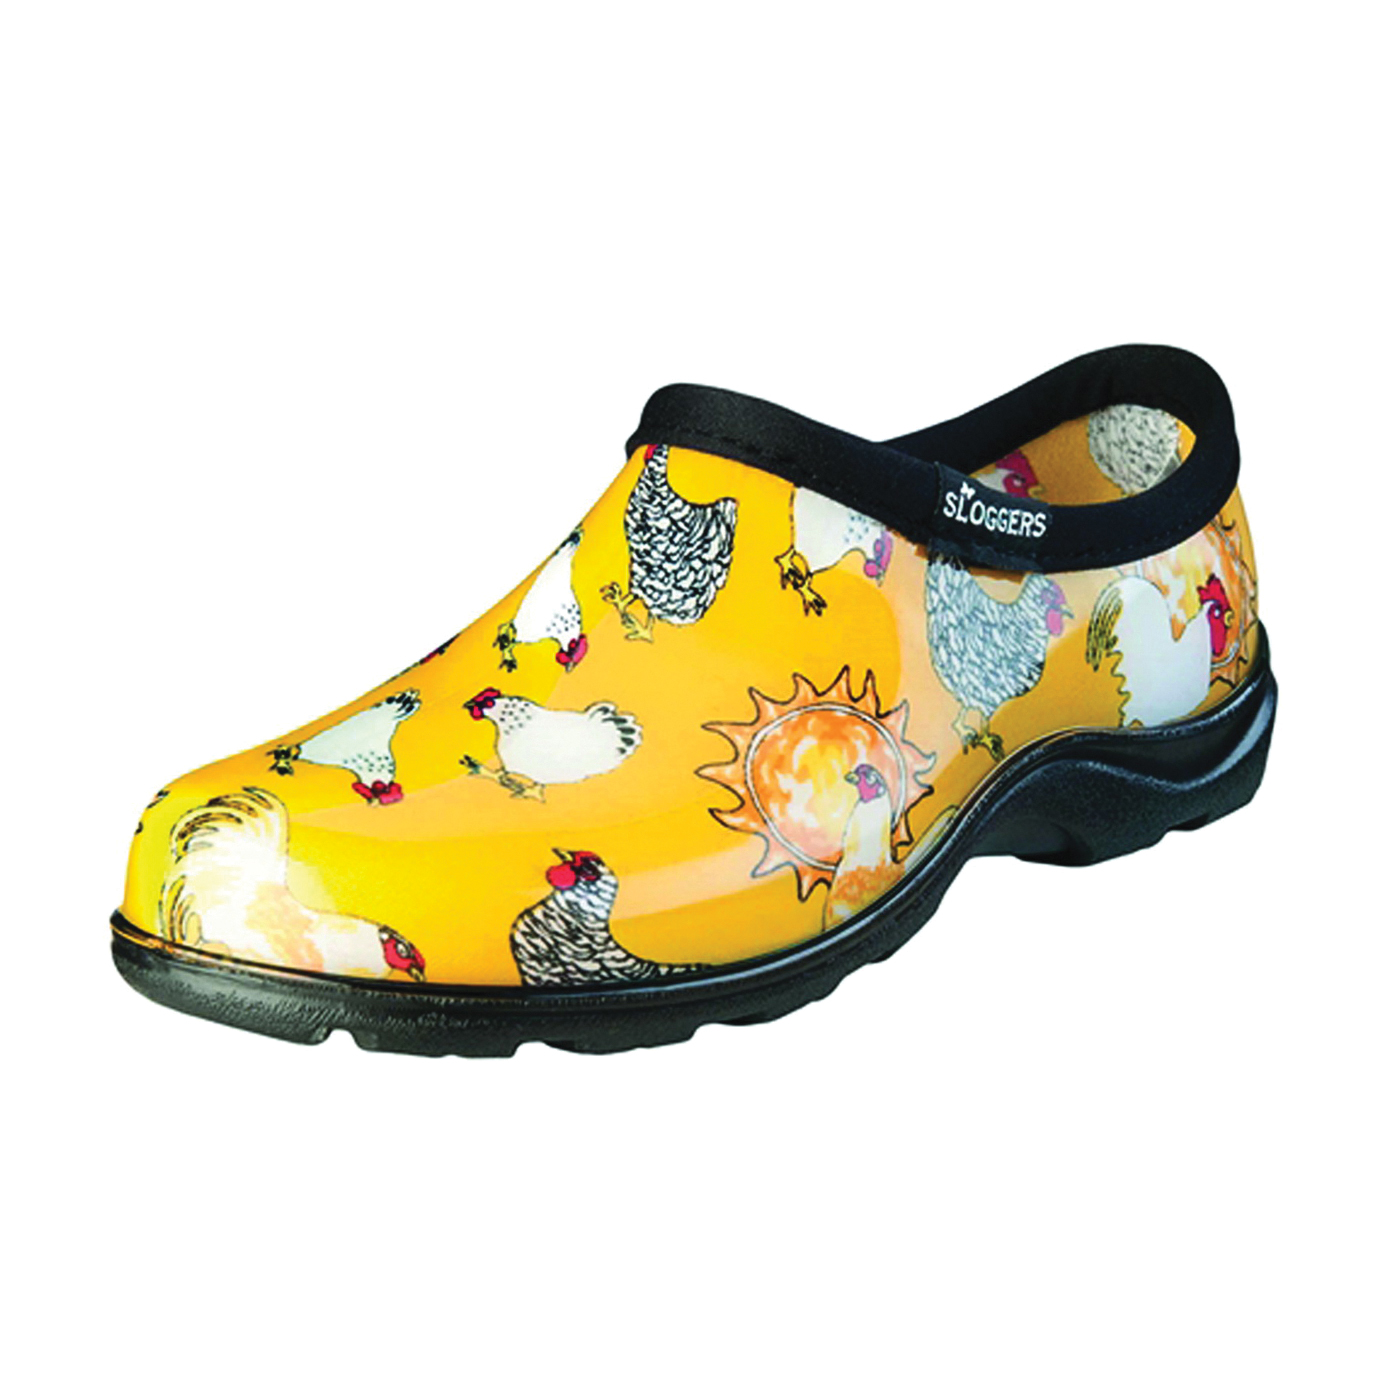 Sloggers 5116CDY-09 Garden Shoes, 9 in, Yellow - 1